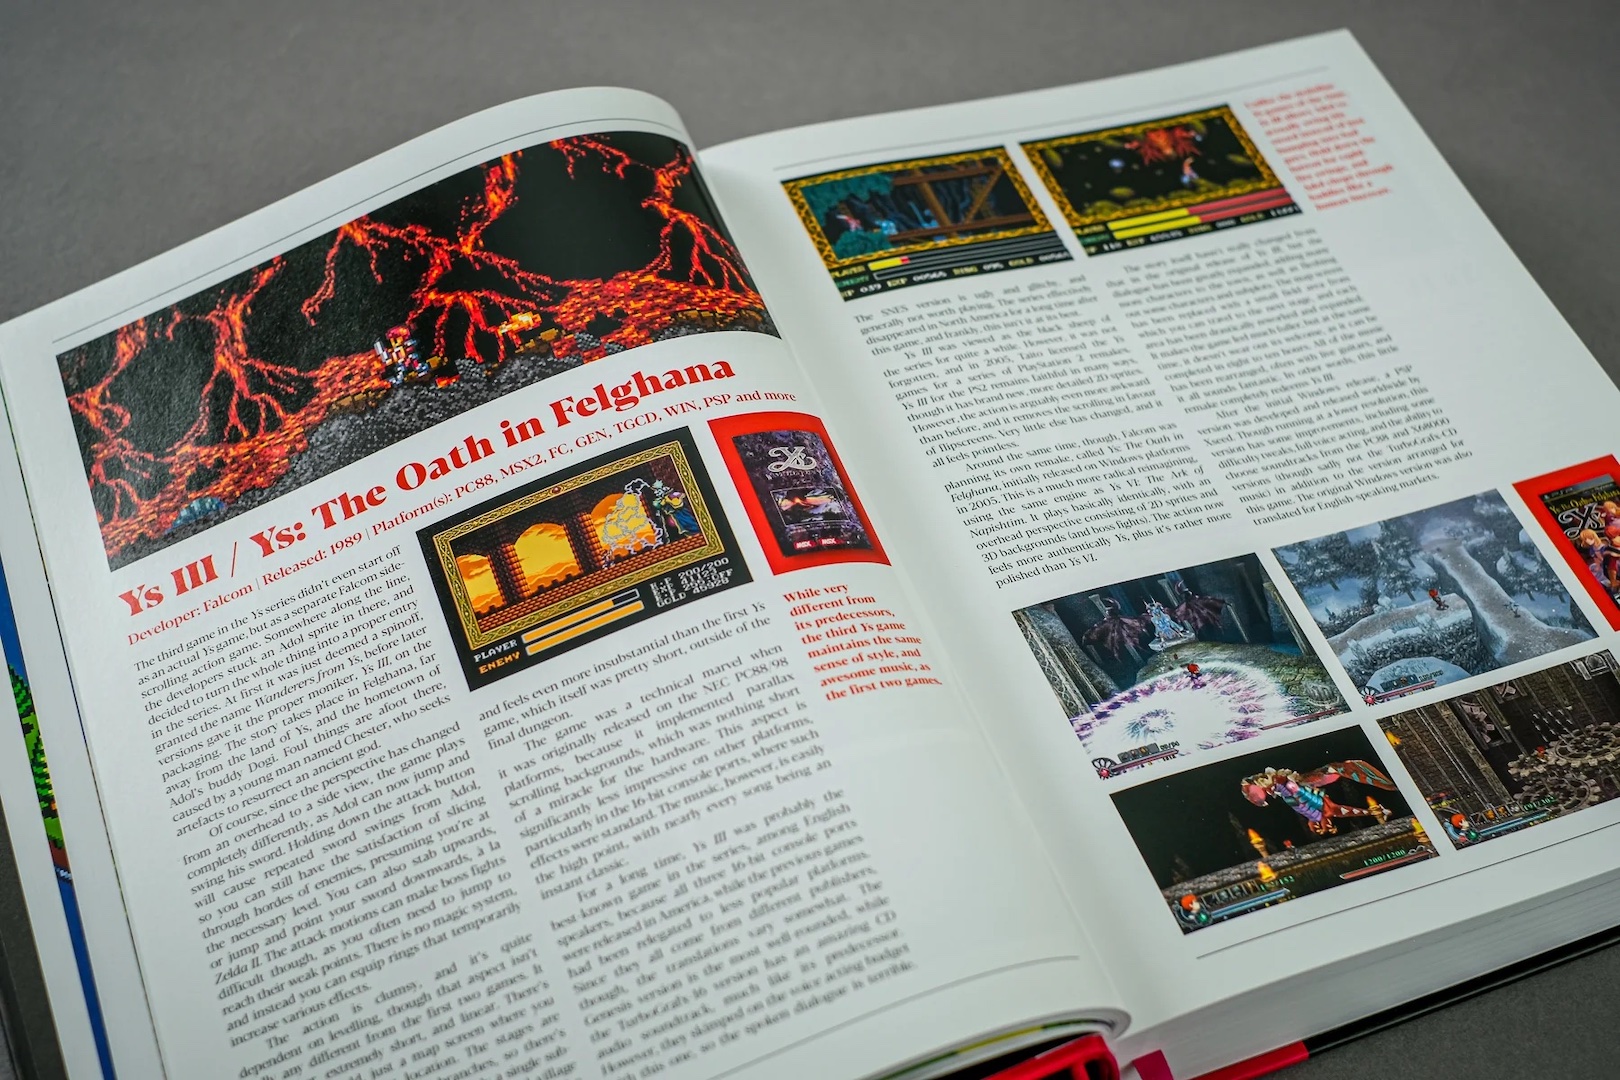 Bitmap Books: A Guide to Japanese Role-Playing Games #11